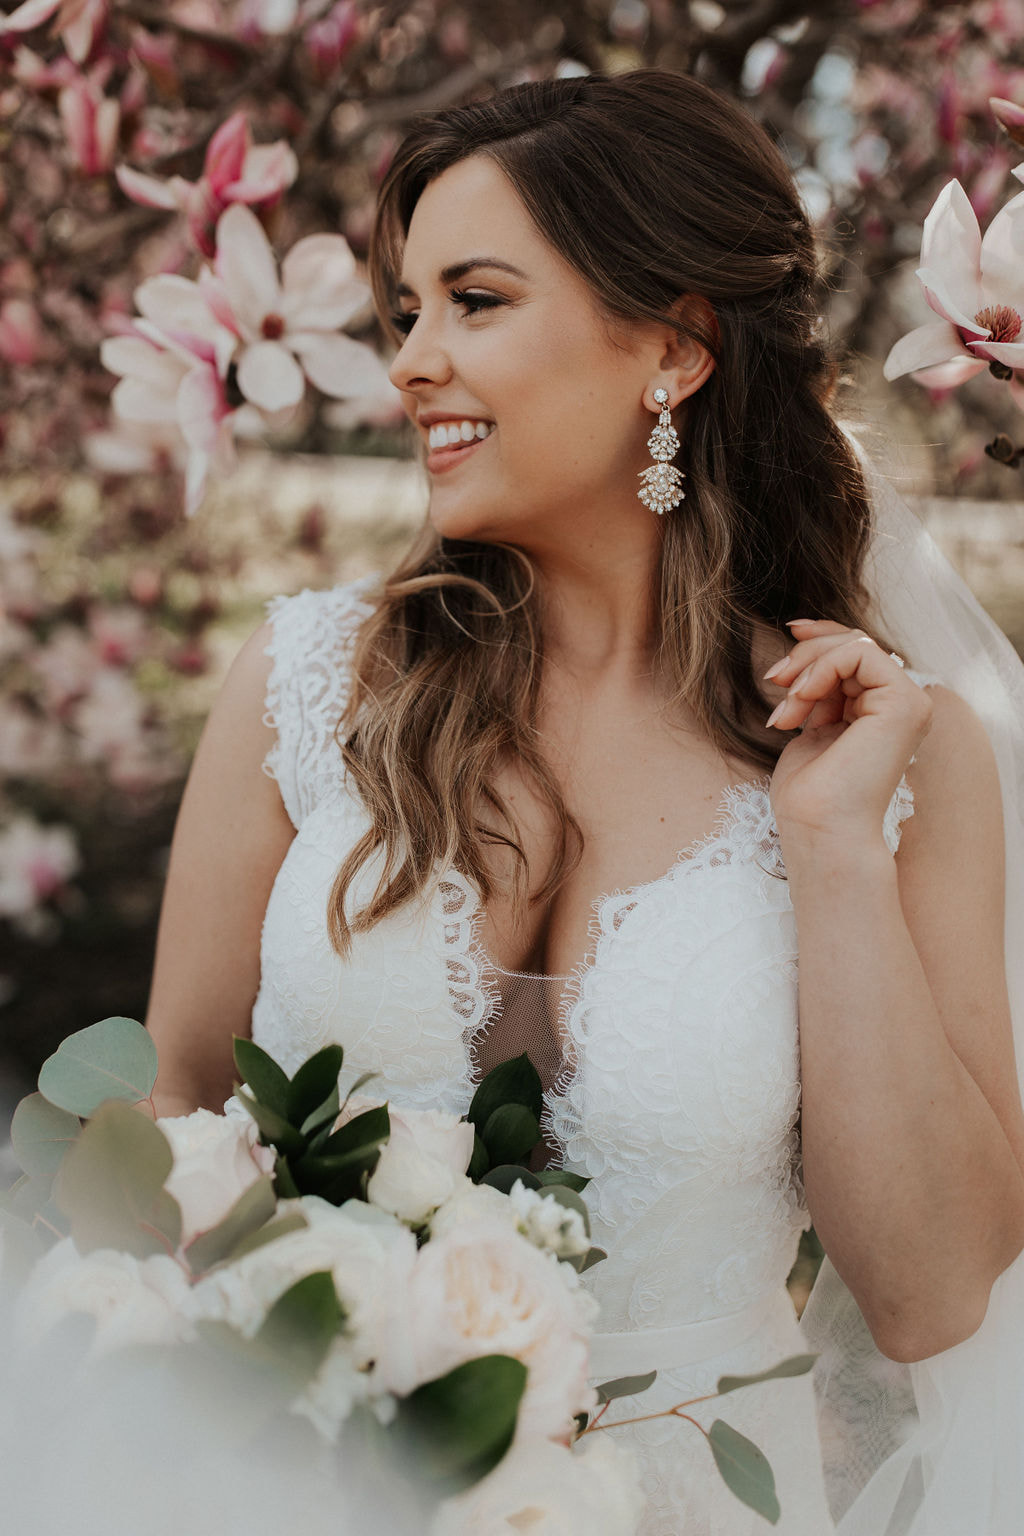 Bridal portrait at blooming cherry blossom tree